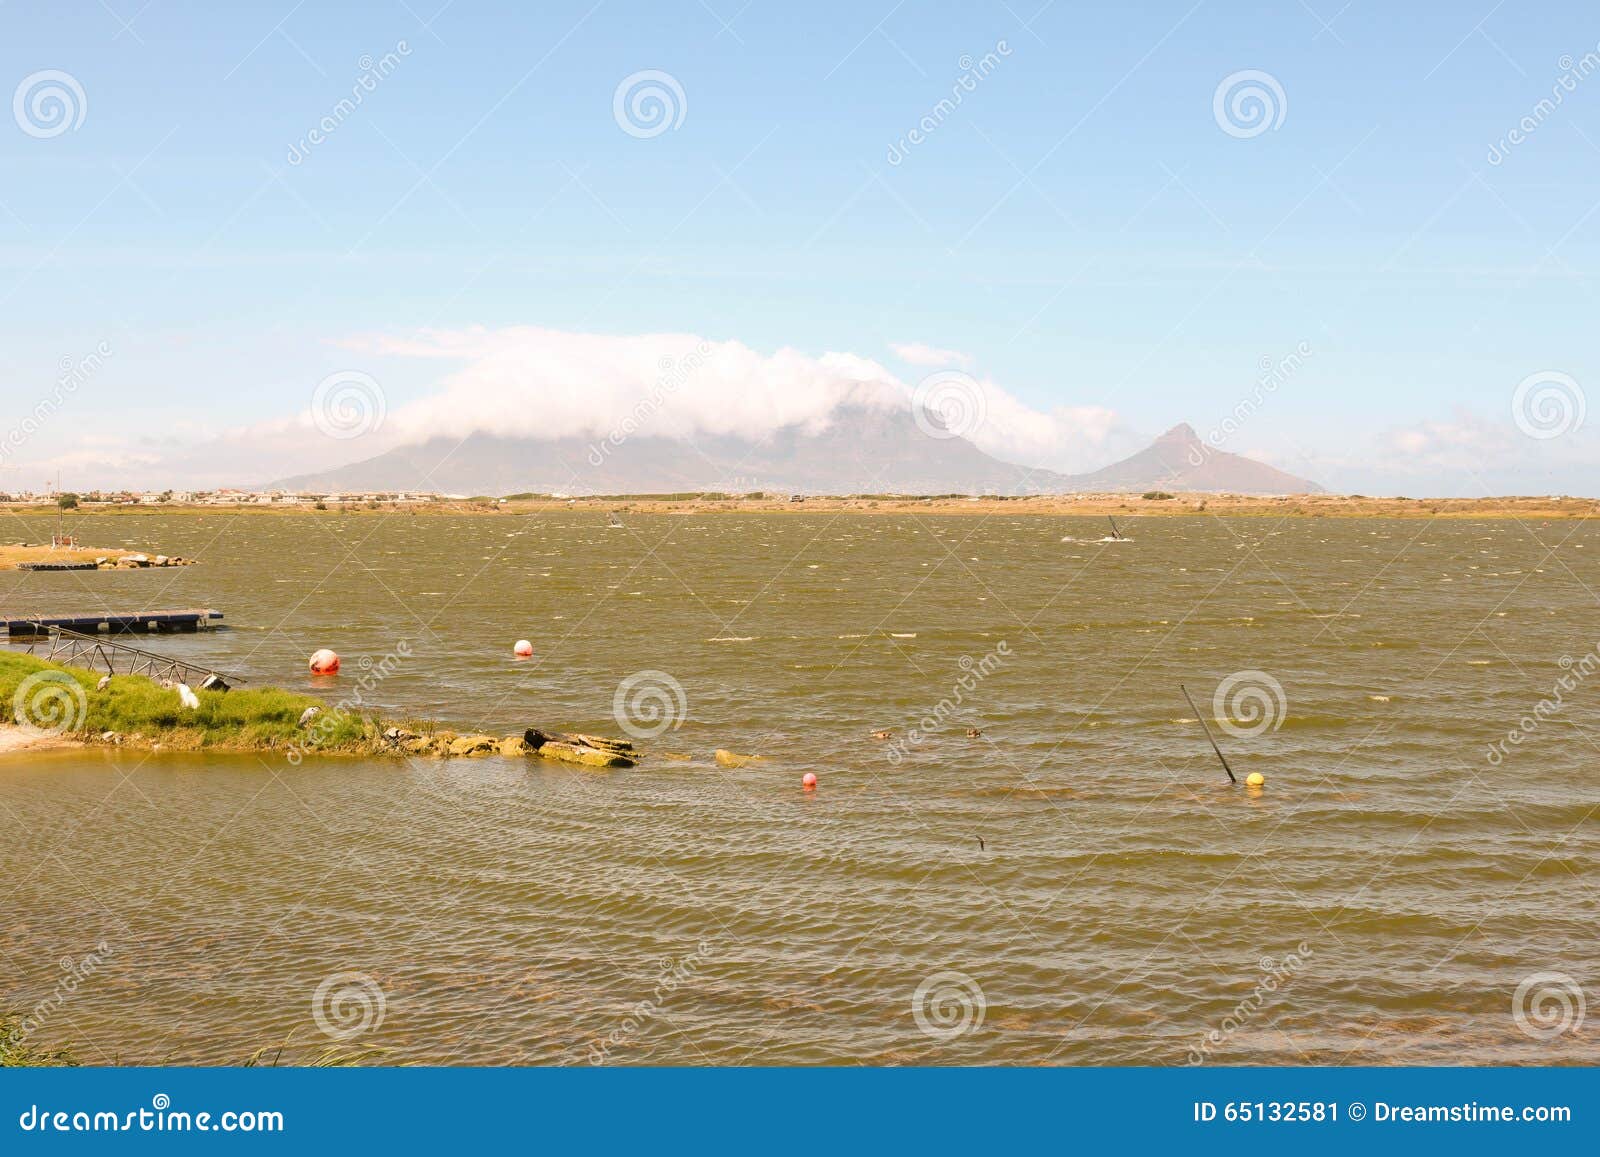 rietvlei in table bay nature reserve with table mountain in the background, cape town, south africa